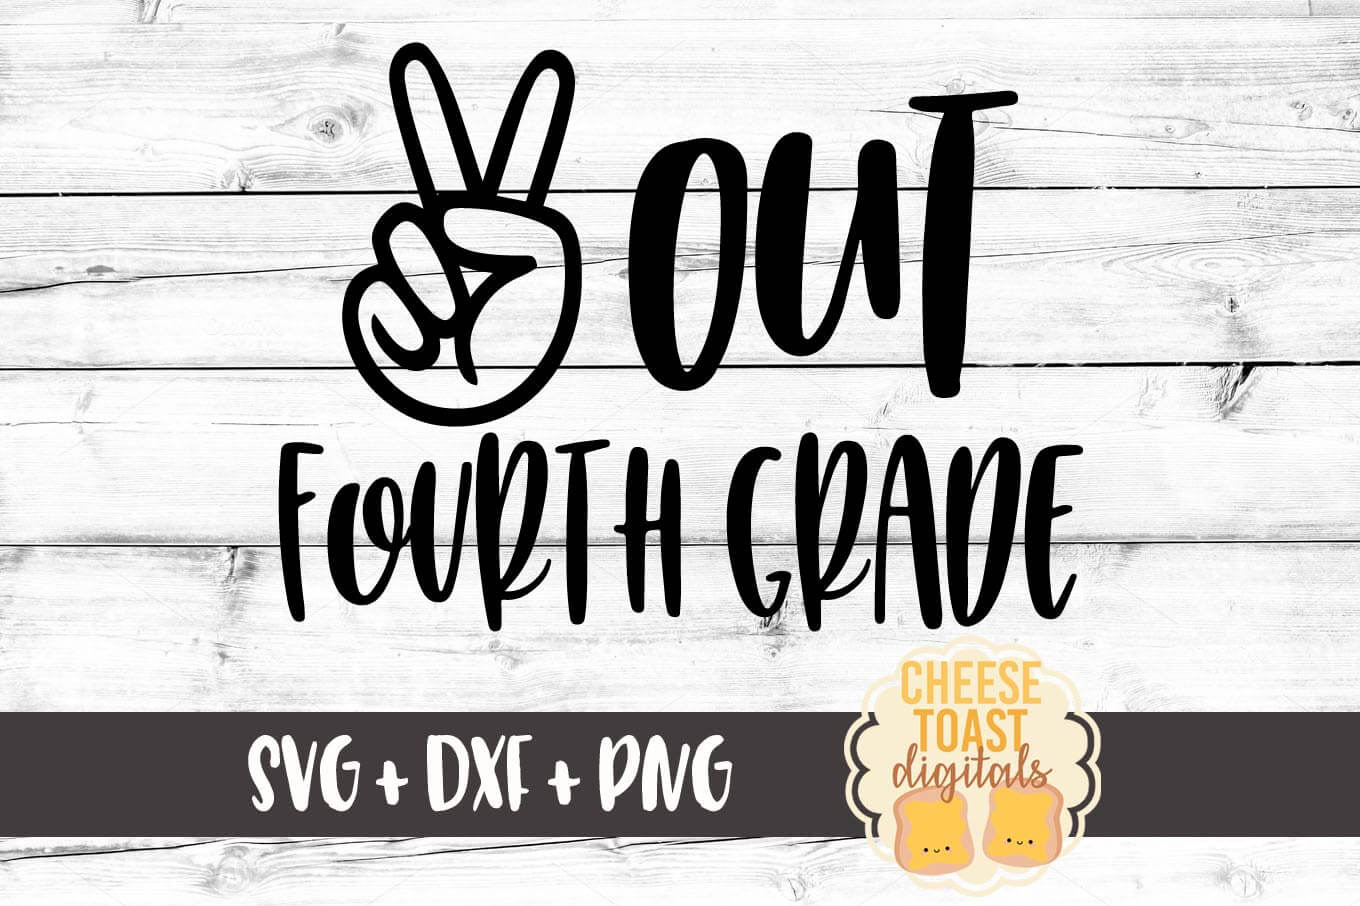 Download Peace Out Fourth Grade SVG - Free and Premium SVG Files ...